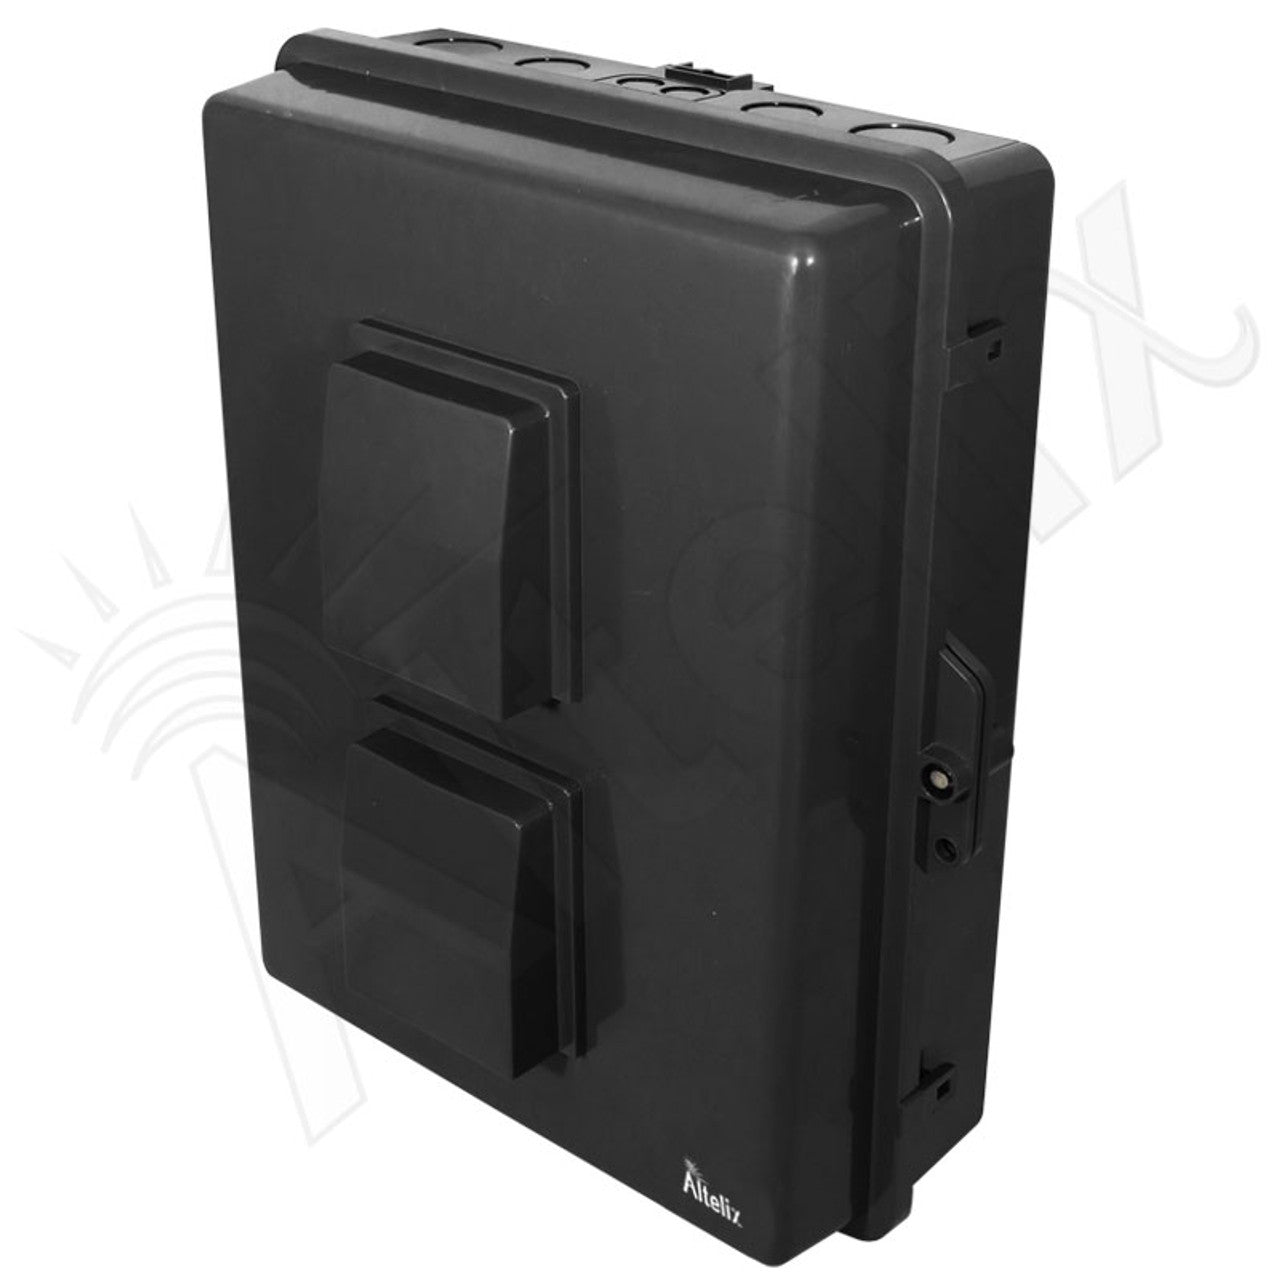 Altelix 17x14x6 Inch Polycarbonate + ABS Vented Weatherproof NEMA Enclosure with Aluminum Mounting Plate-3